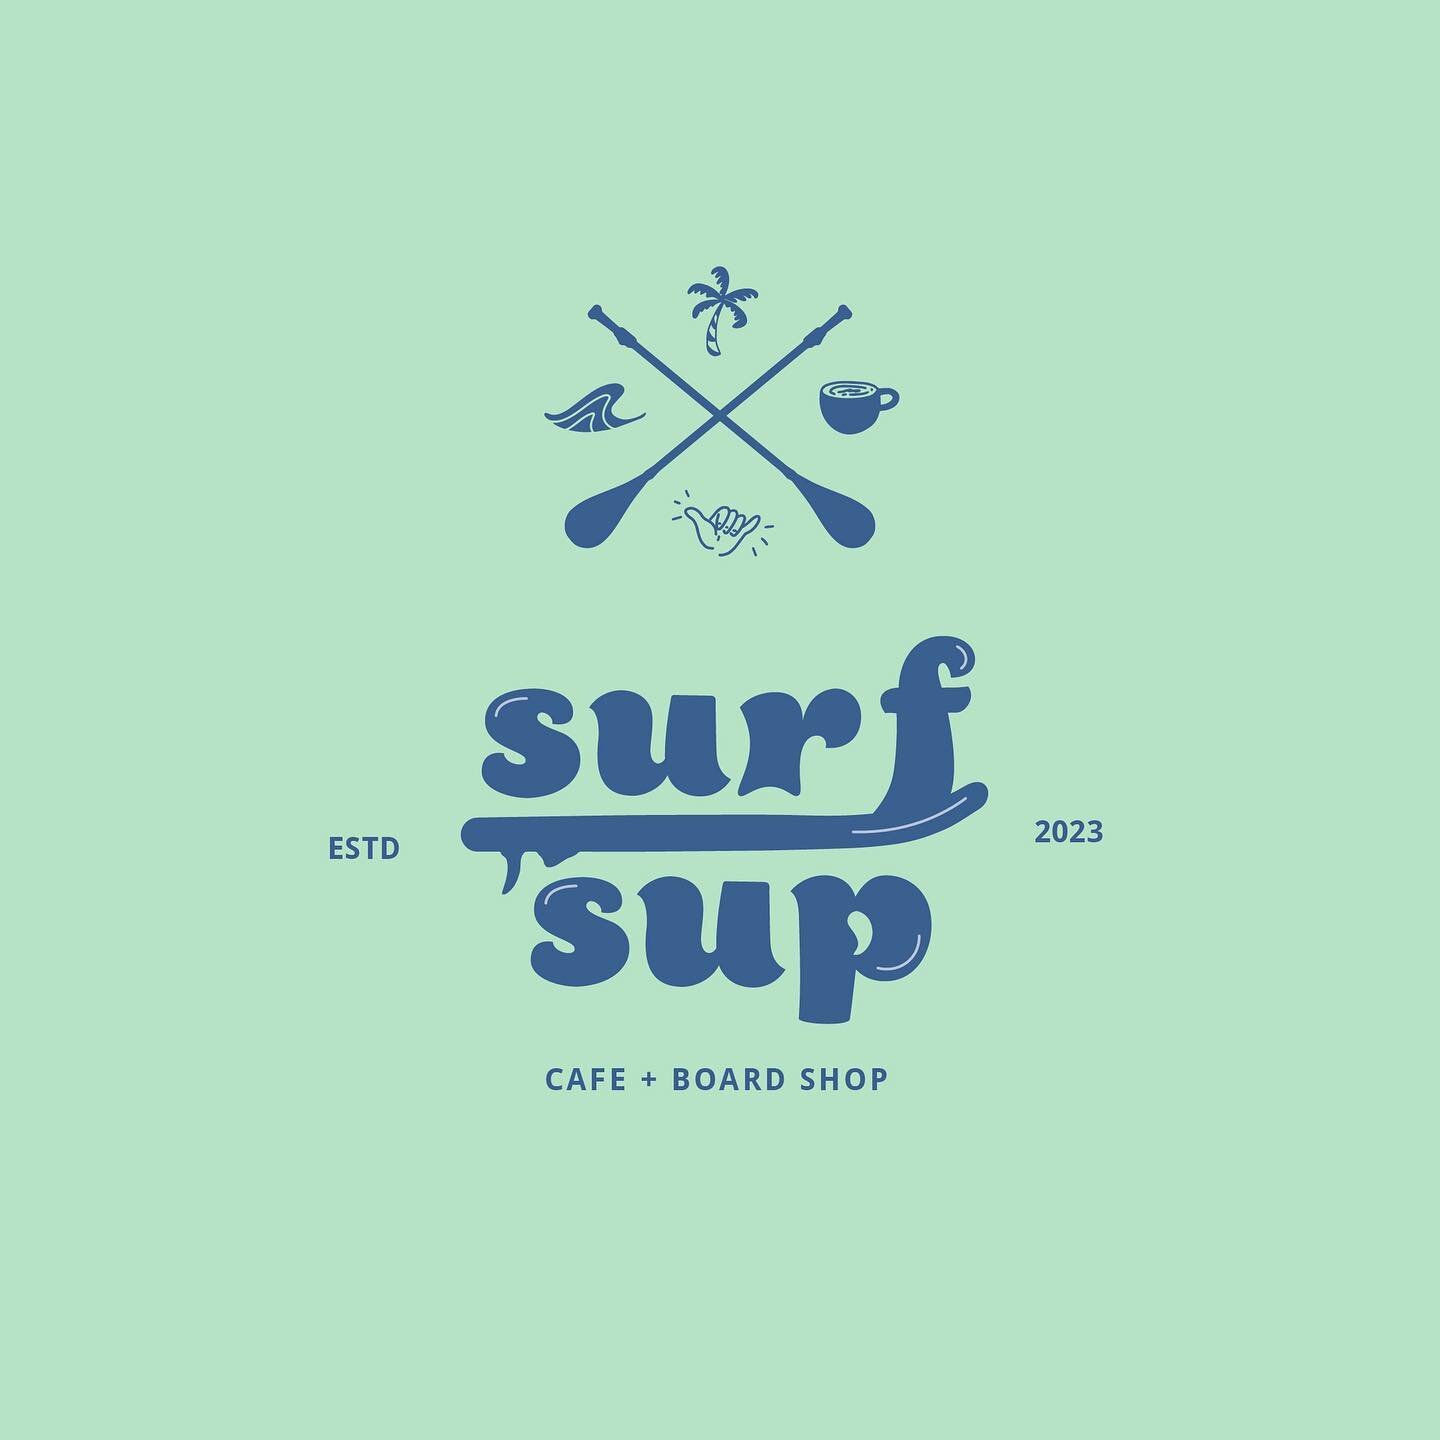 Branding for cafe and paddle board shop, SURF SUP 🌊 We&rsquo;ve got some surfer vibes, some retro vibes and a bold and vivid colour palette that&rsquo;s full of energy 💫 We particularly loved illustrating the custom brand pattern and icons in the l